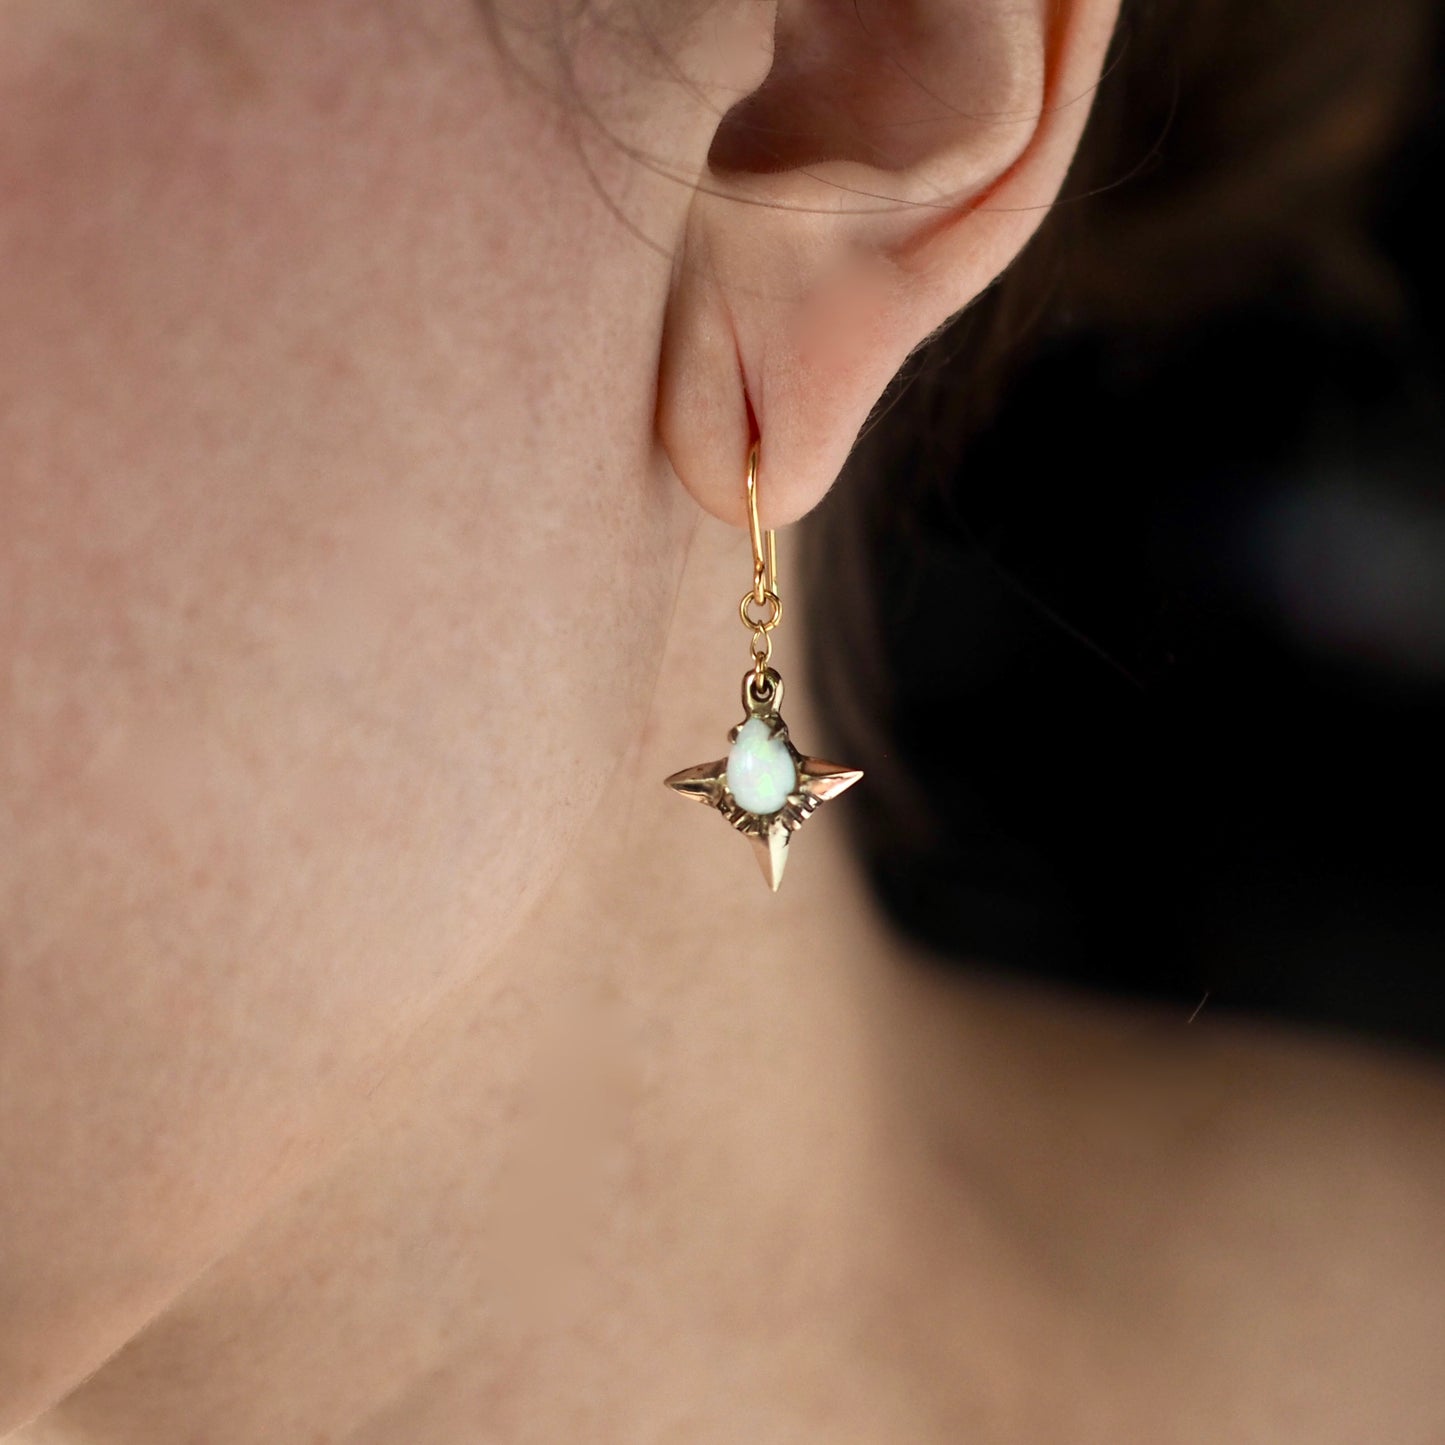  Teardrop shaped lab grown opal set in 4 point star setting in gold tone bronze handmade by Iron Oxide Designs on a model